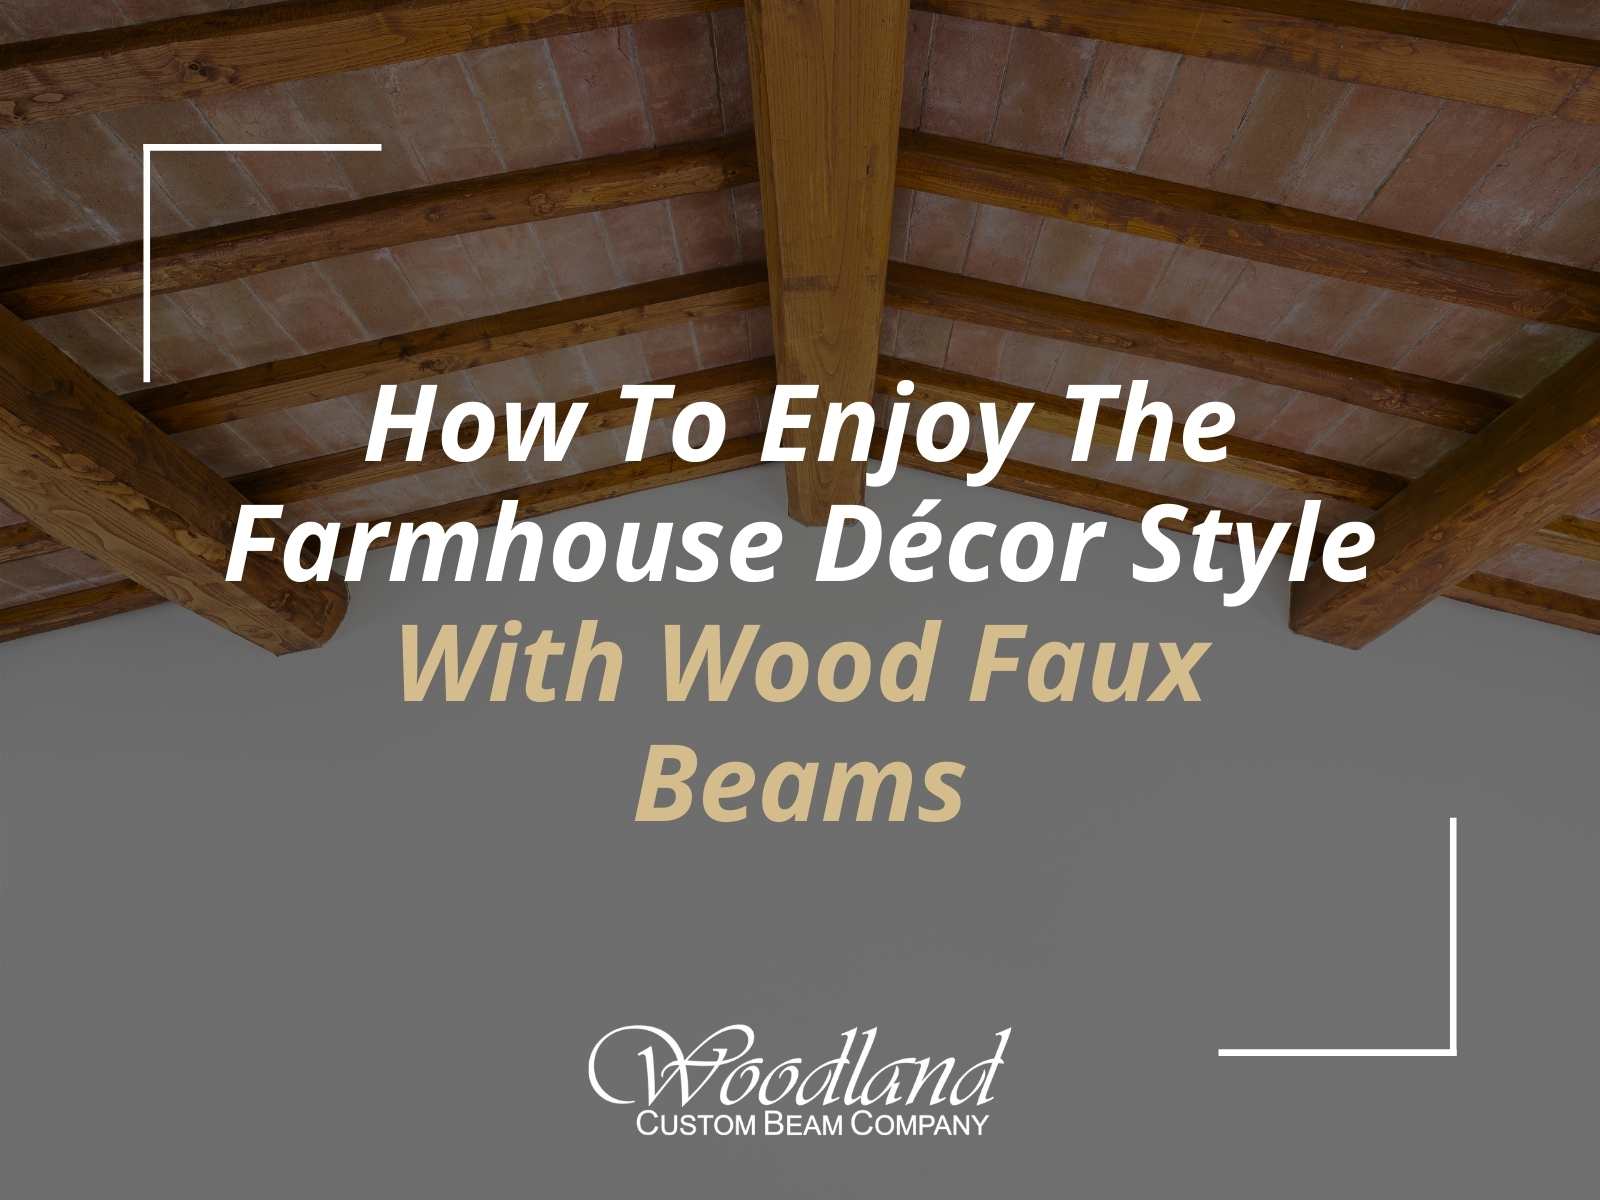 How To Enjoy The Farmhouse Décor Style With Wood Faux Beams